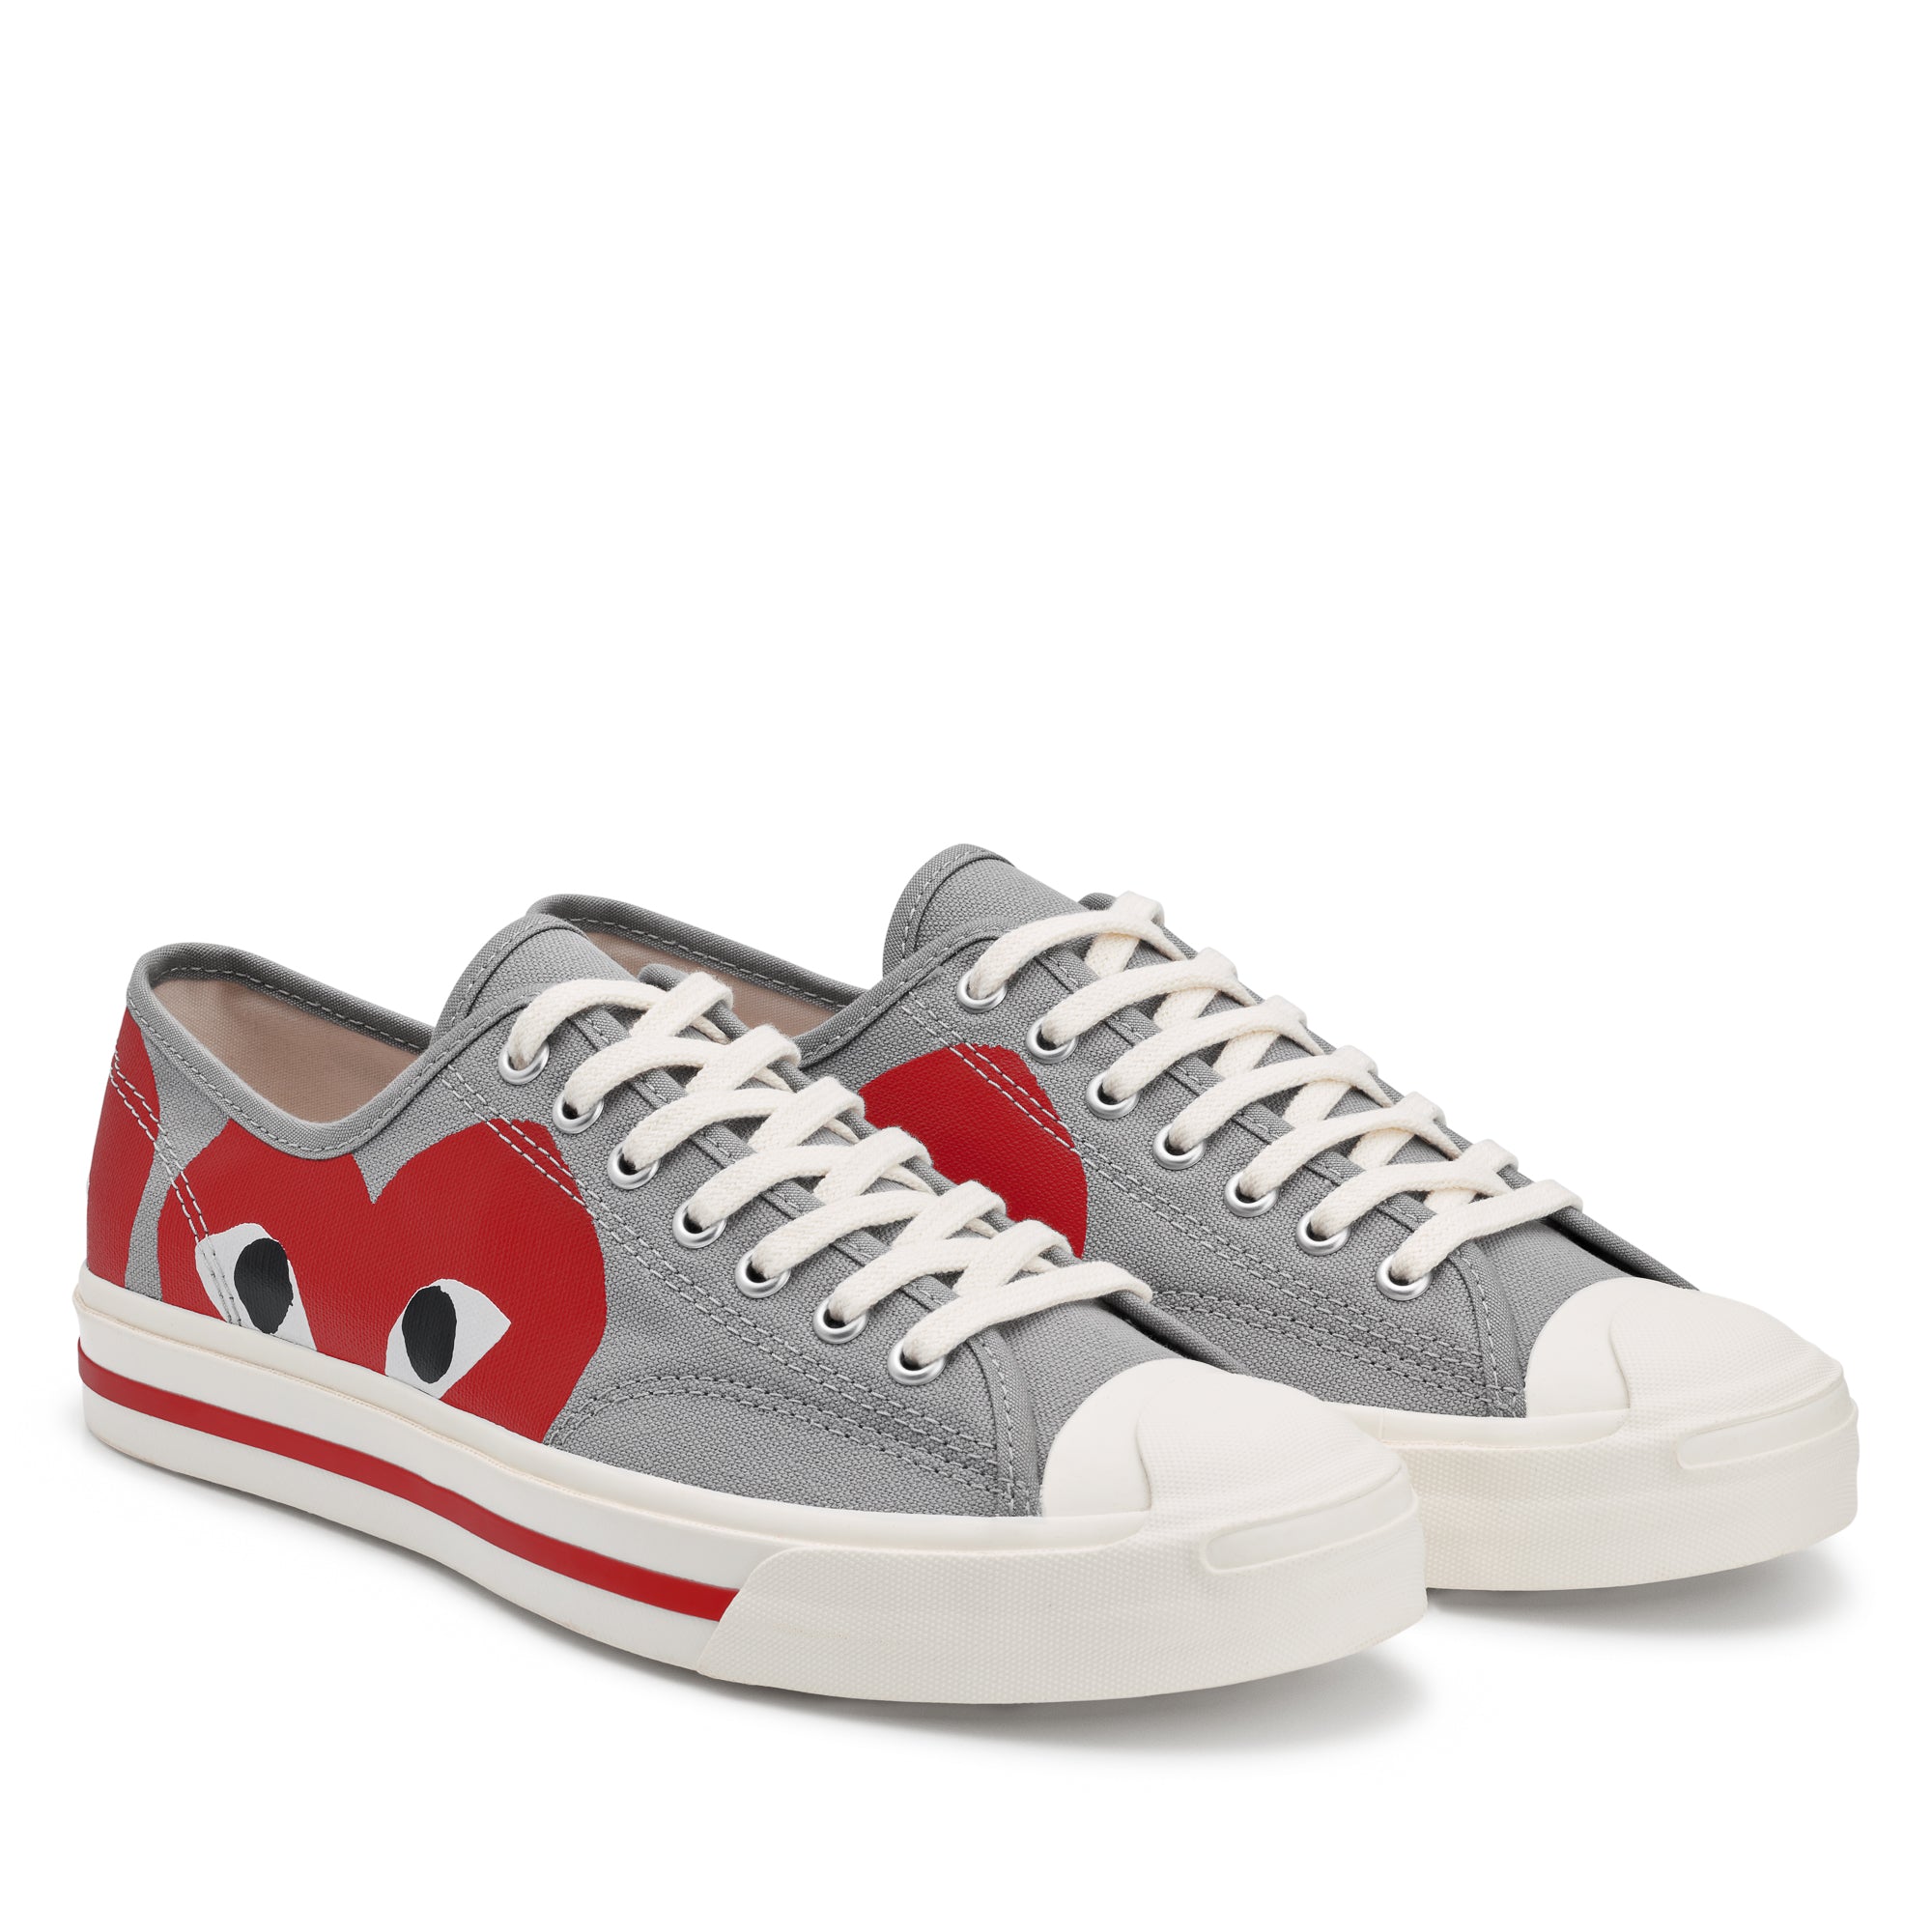 PLAY CONVERSE - Jack Purcell - (Red) view 5